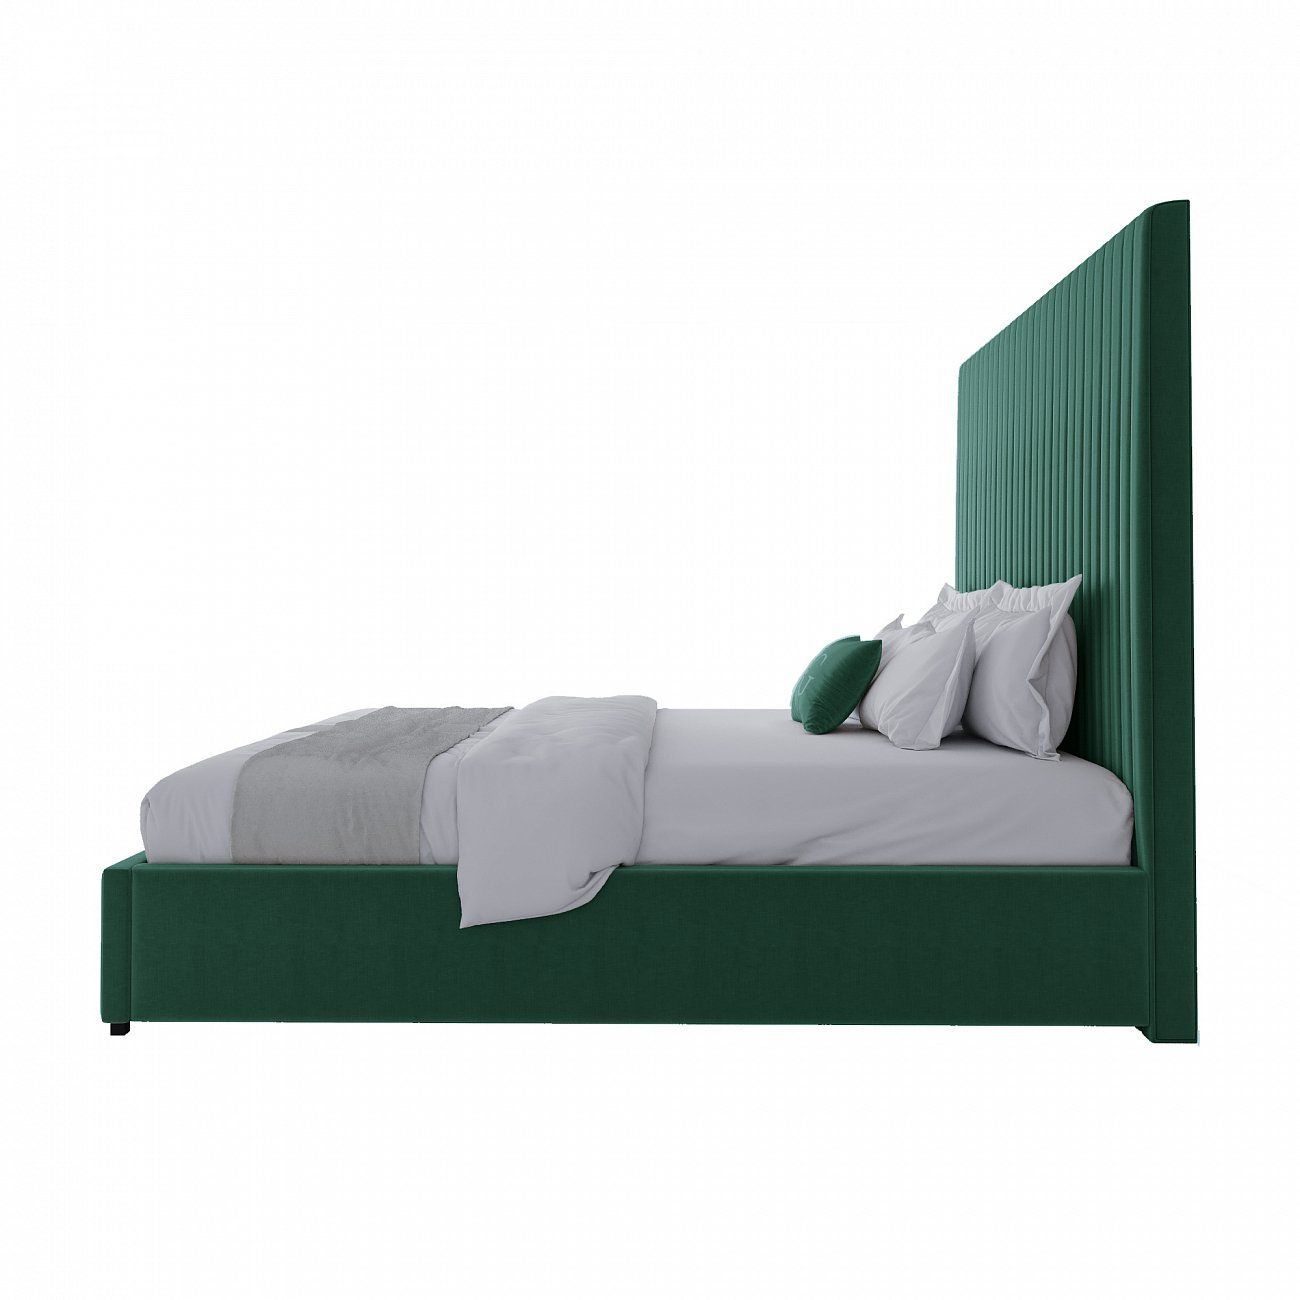 Double bed with upholstered headboard 180x200 cm green forest Mora